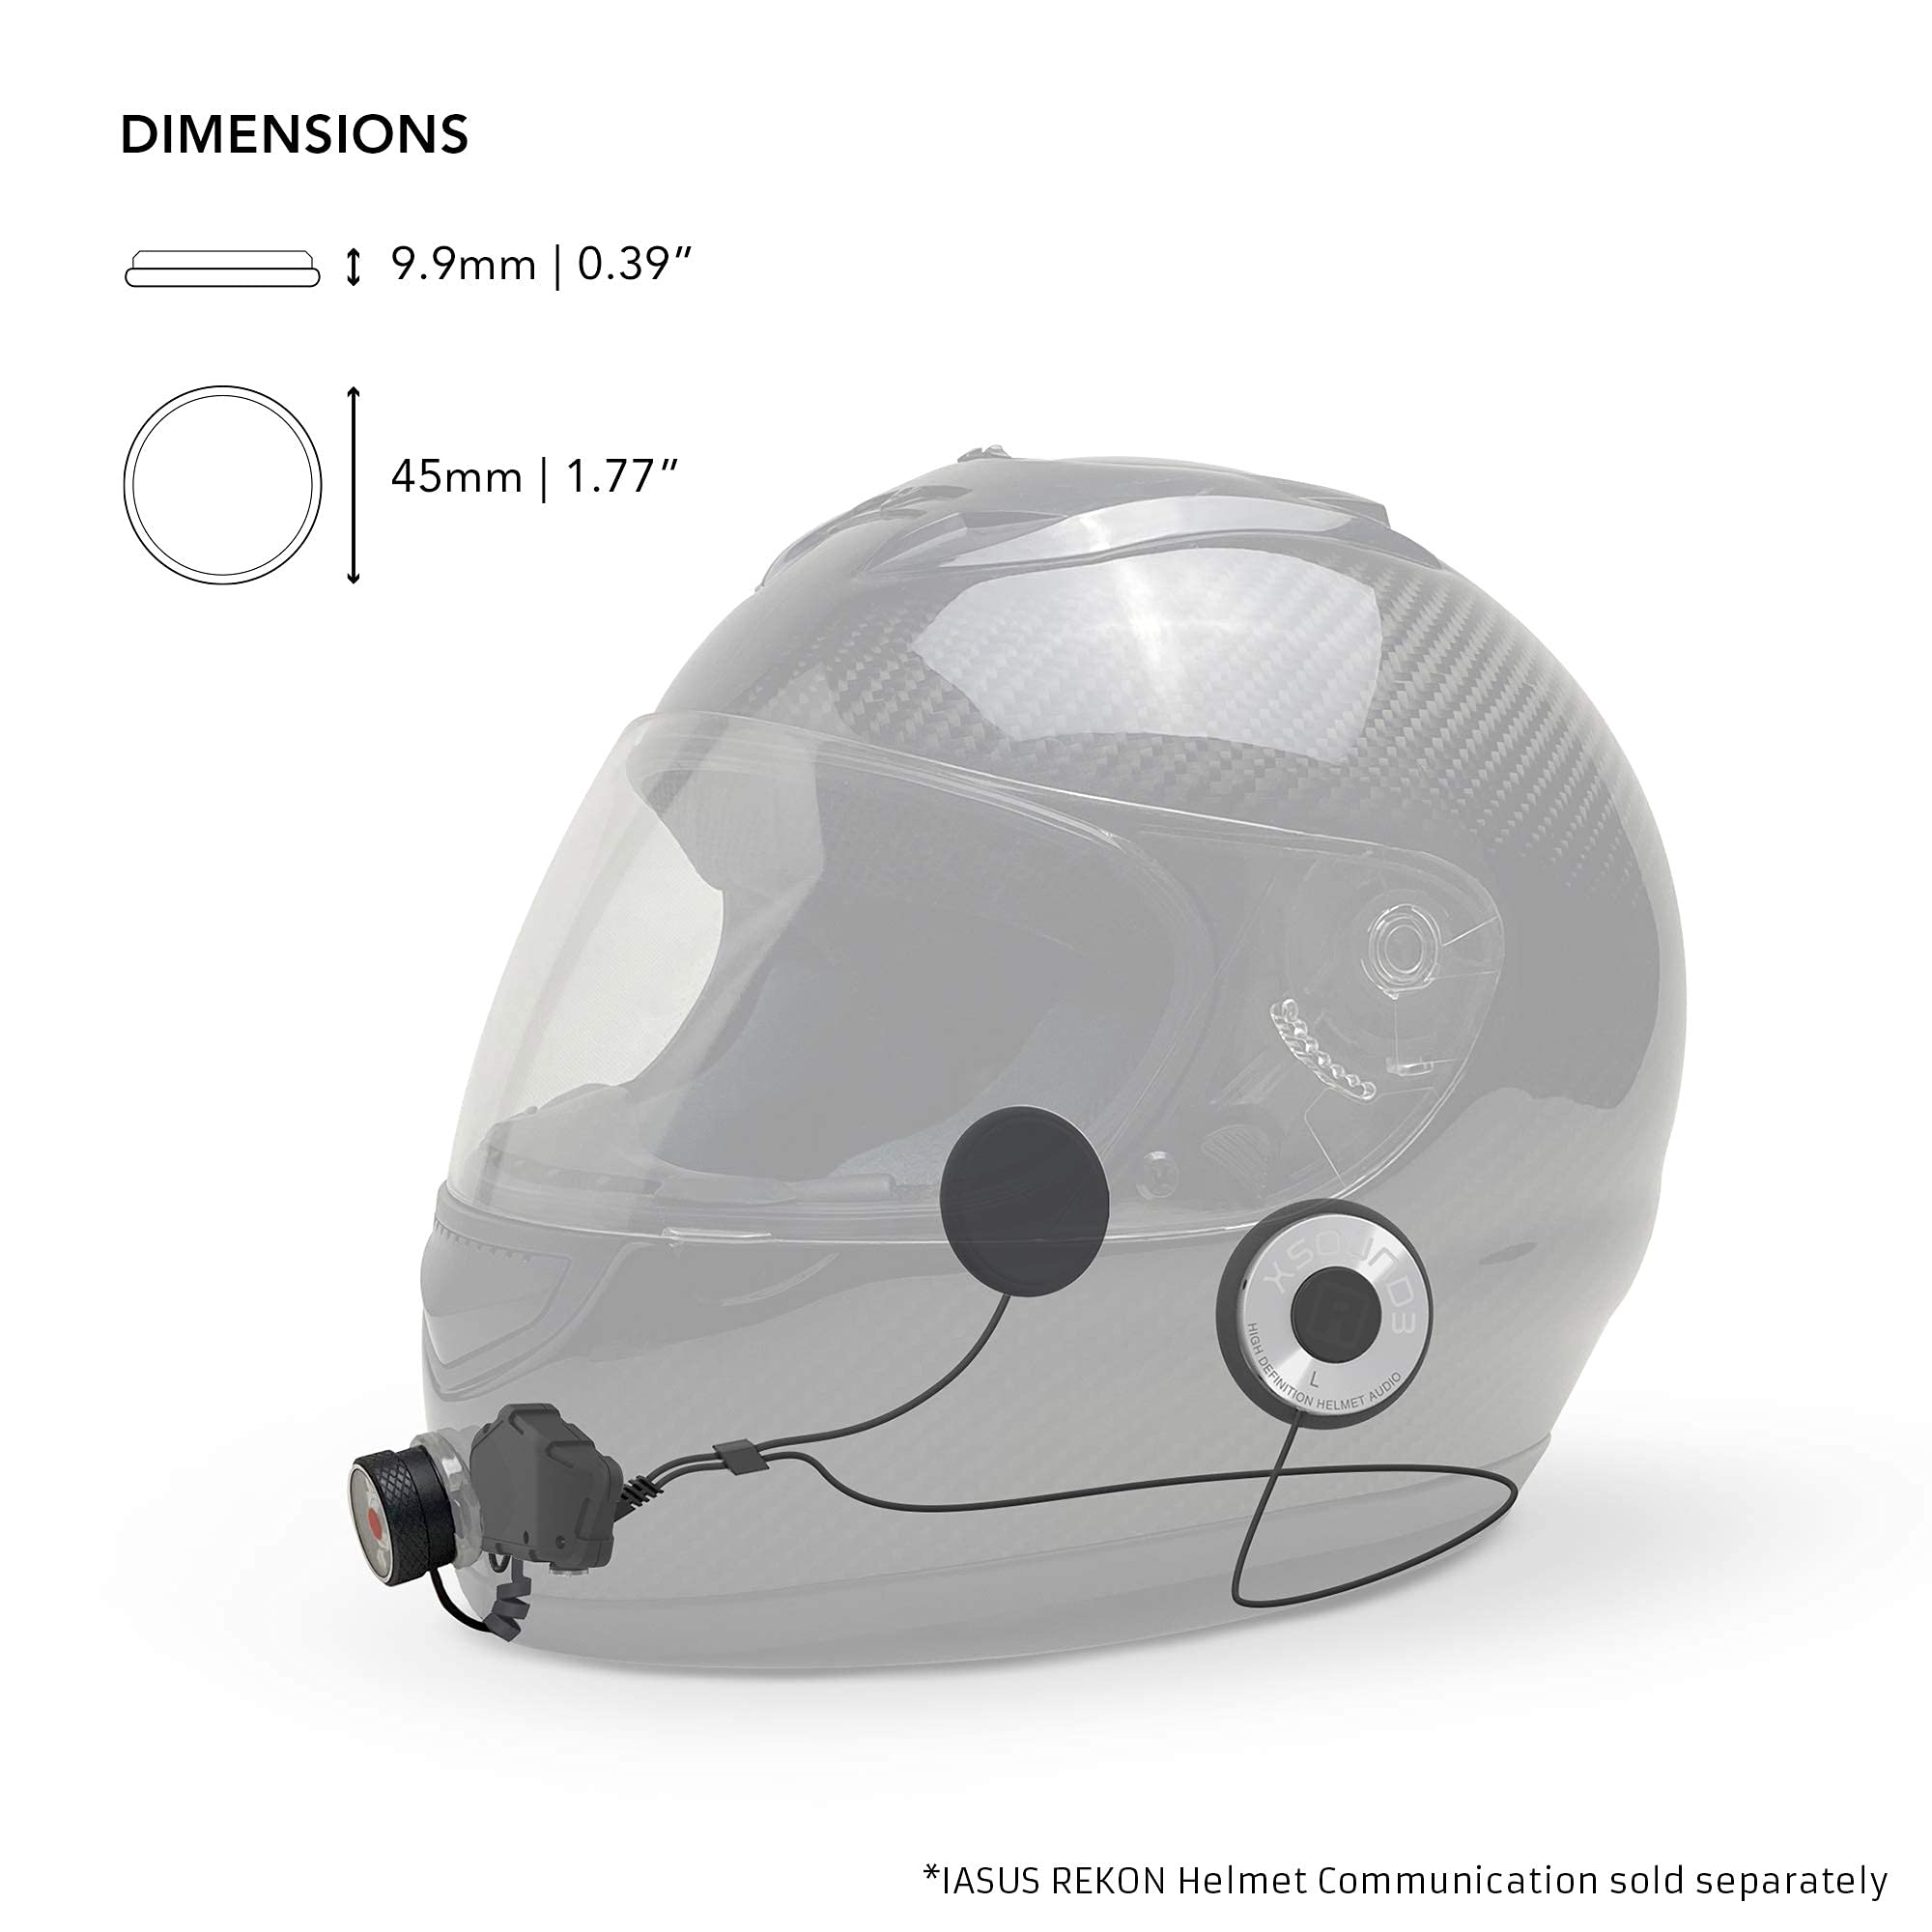 I A S U S Premium Audio Motorcycle Helmet Speakers Work with Most Helmet Comms with Earbud Ports - The XSound 3 Drop in Helmet Headphones Speaker Kit Includes Accessories for a Quick Install